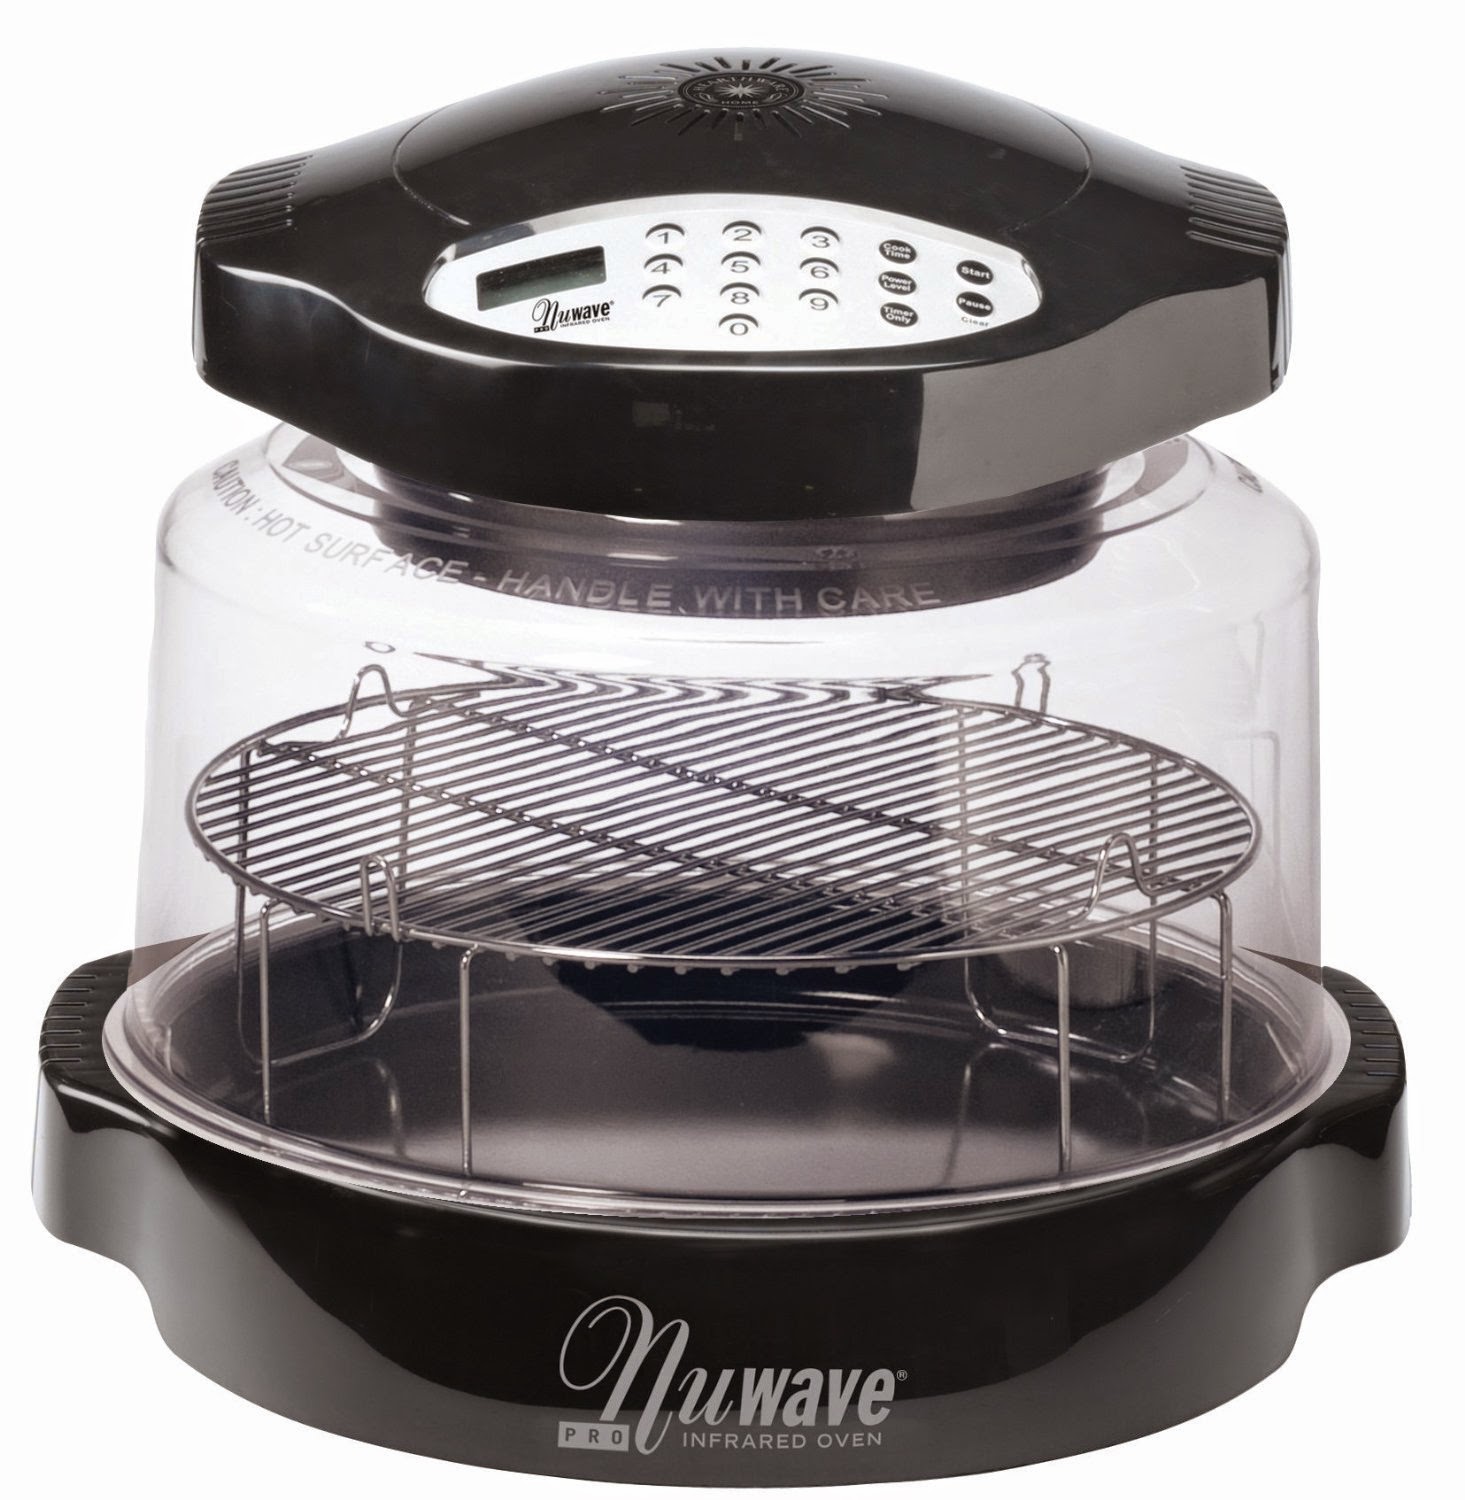 Compare Digital-Controlled Infrared Tabletop Oven: NUWAVE OVEN 20322 vs